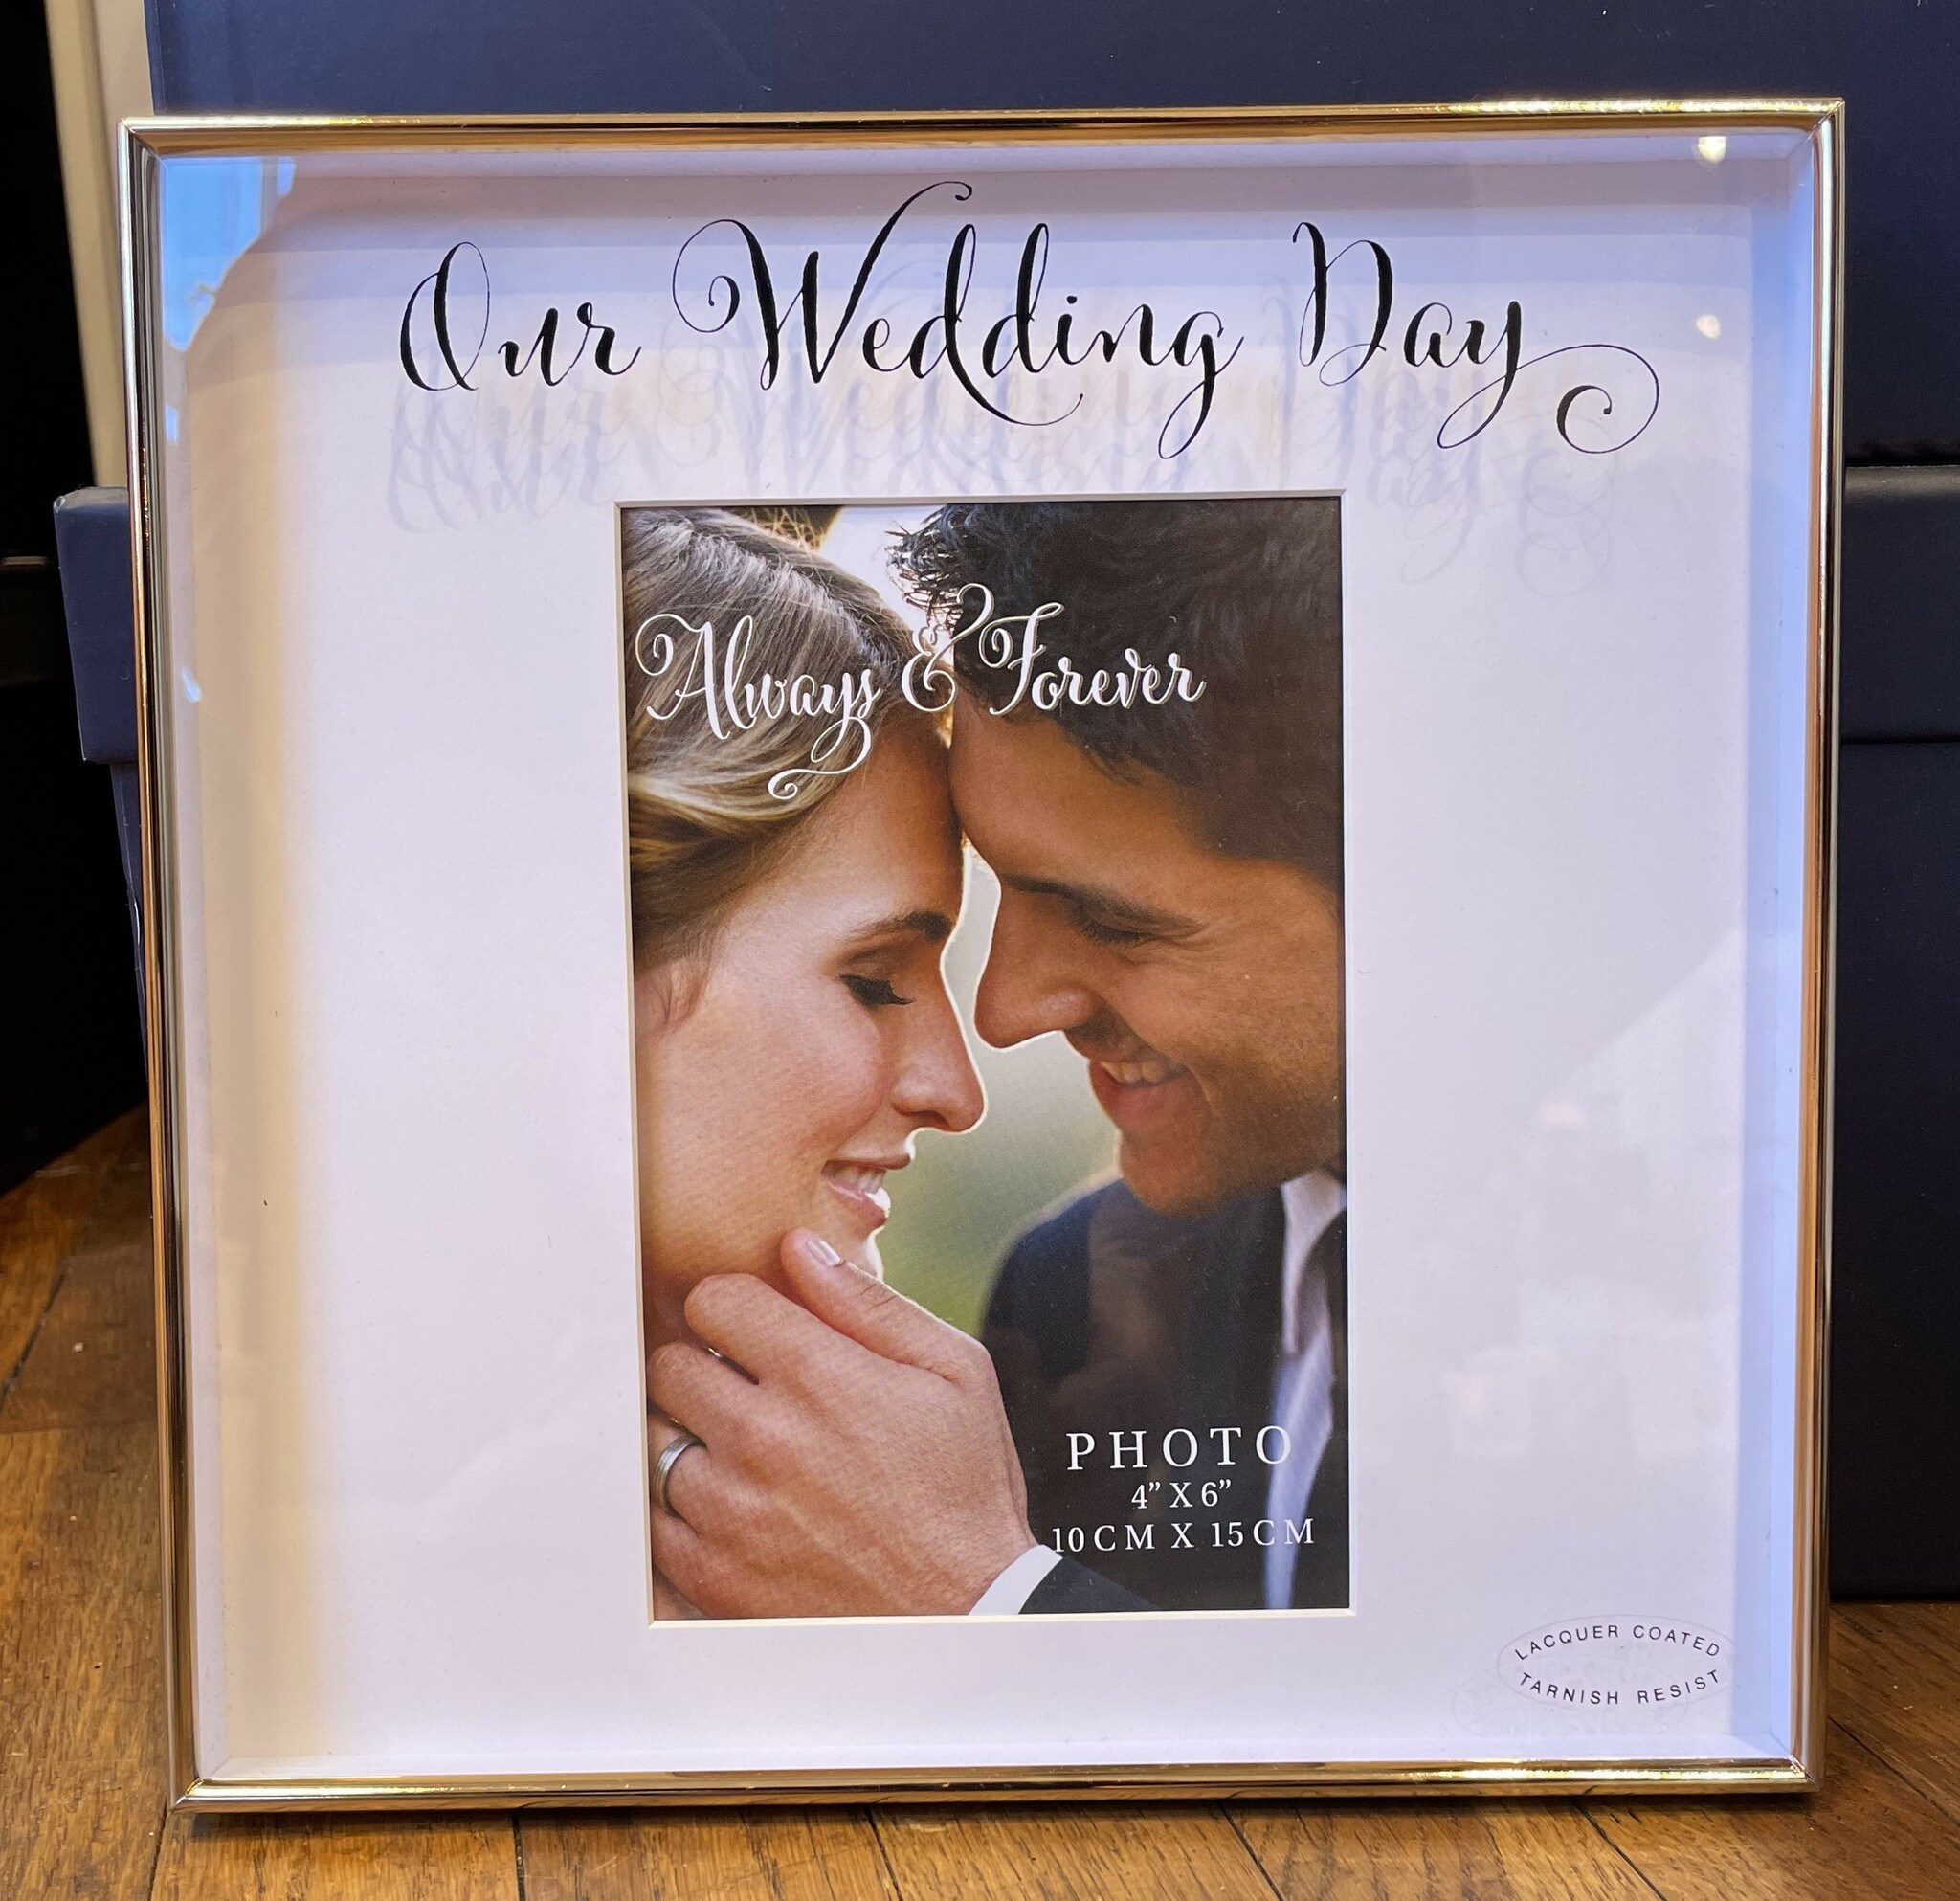 Our Wedding Day Frame